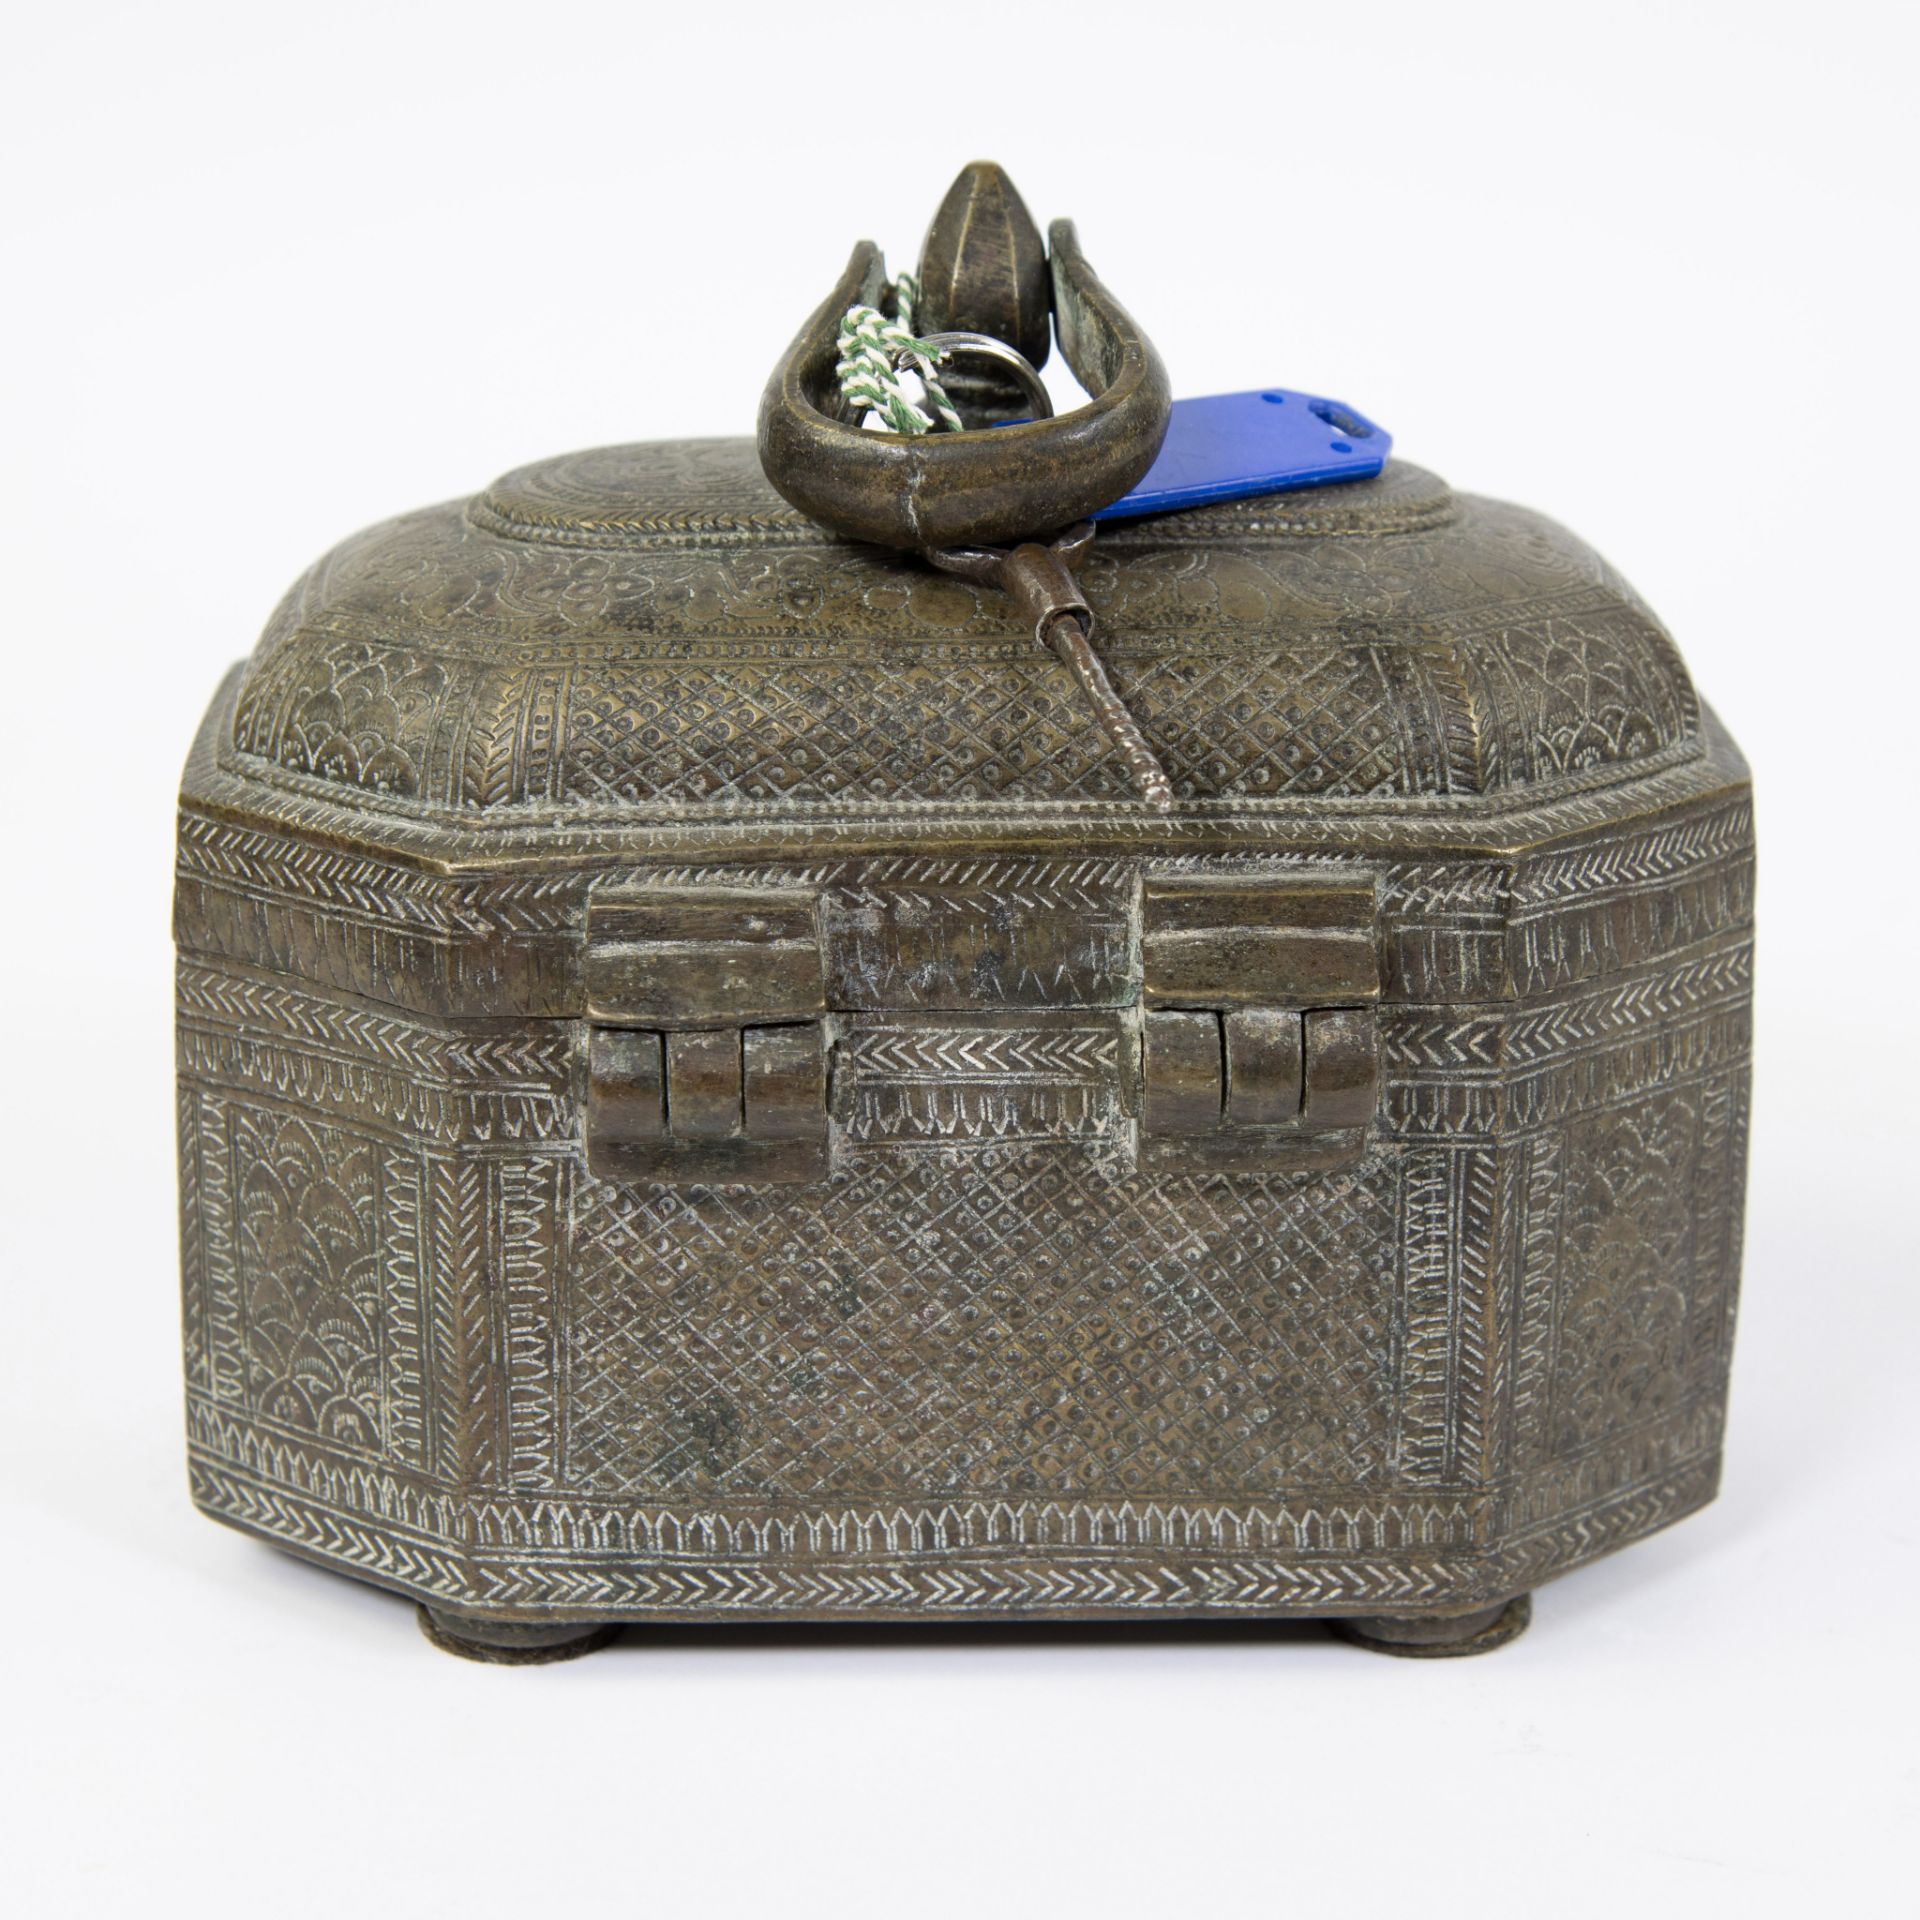 Antique jewelery case Baghdad, fully worked and hammered in bronze, with key - Image 3 of 5